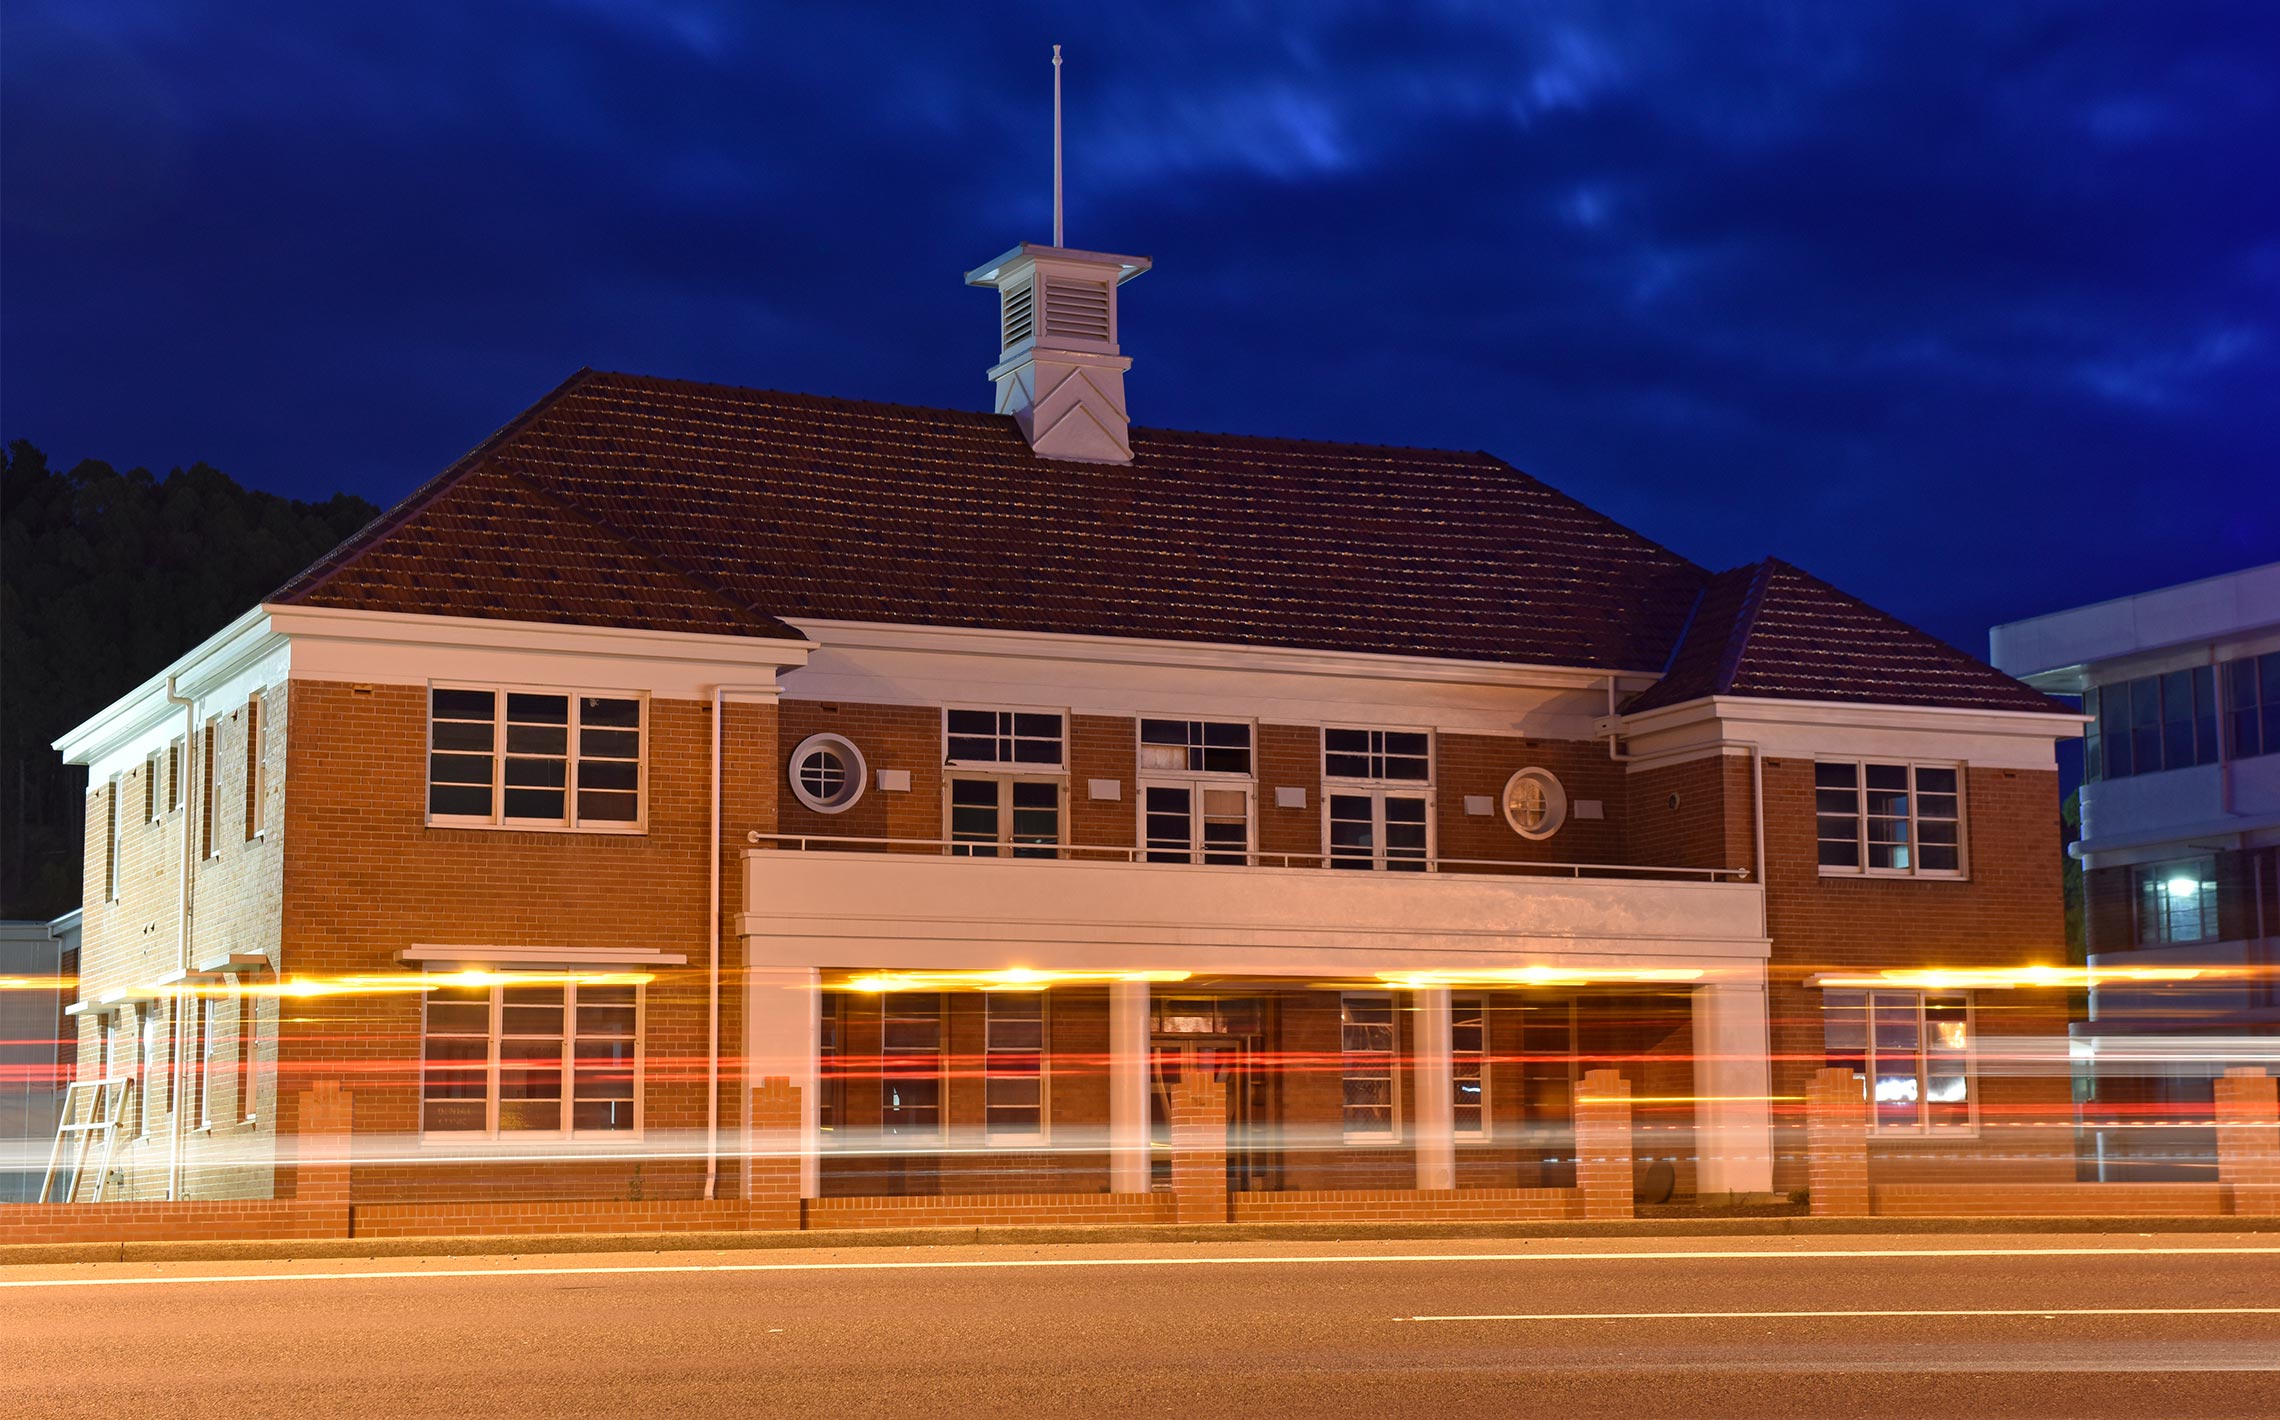 Restored paper mill office building in Burnie, Tasmania with blurred lights. 